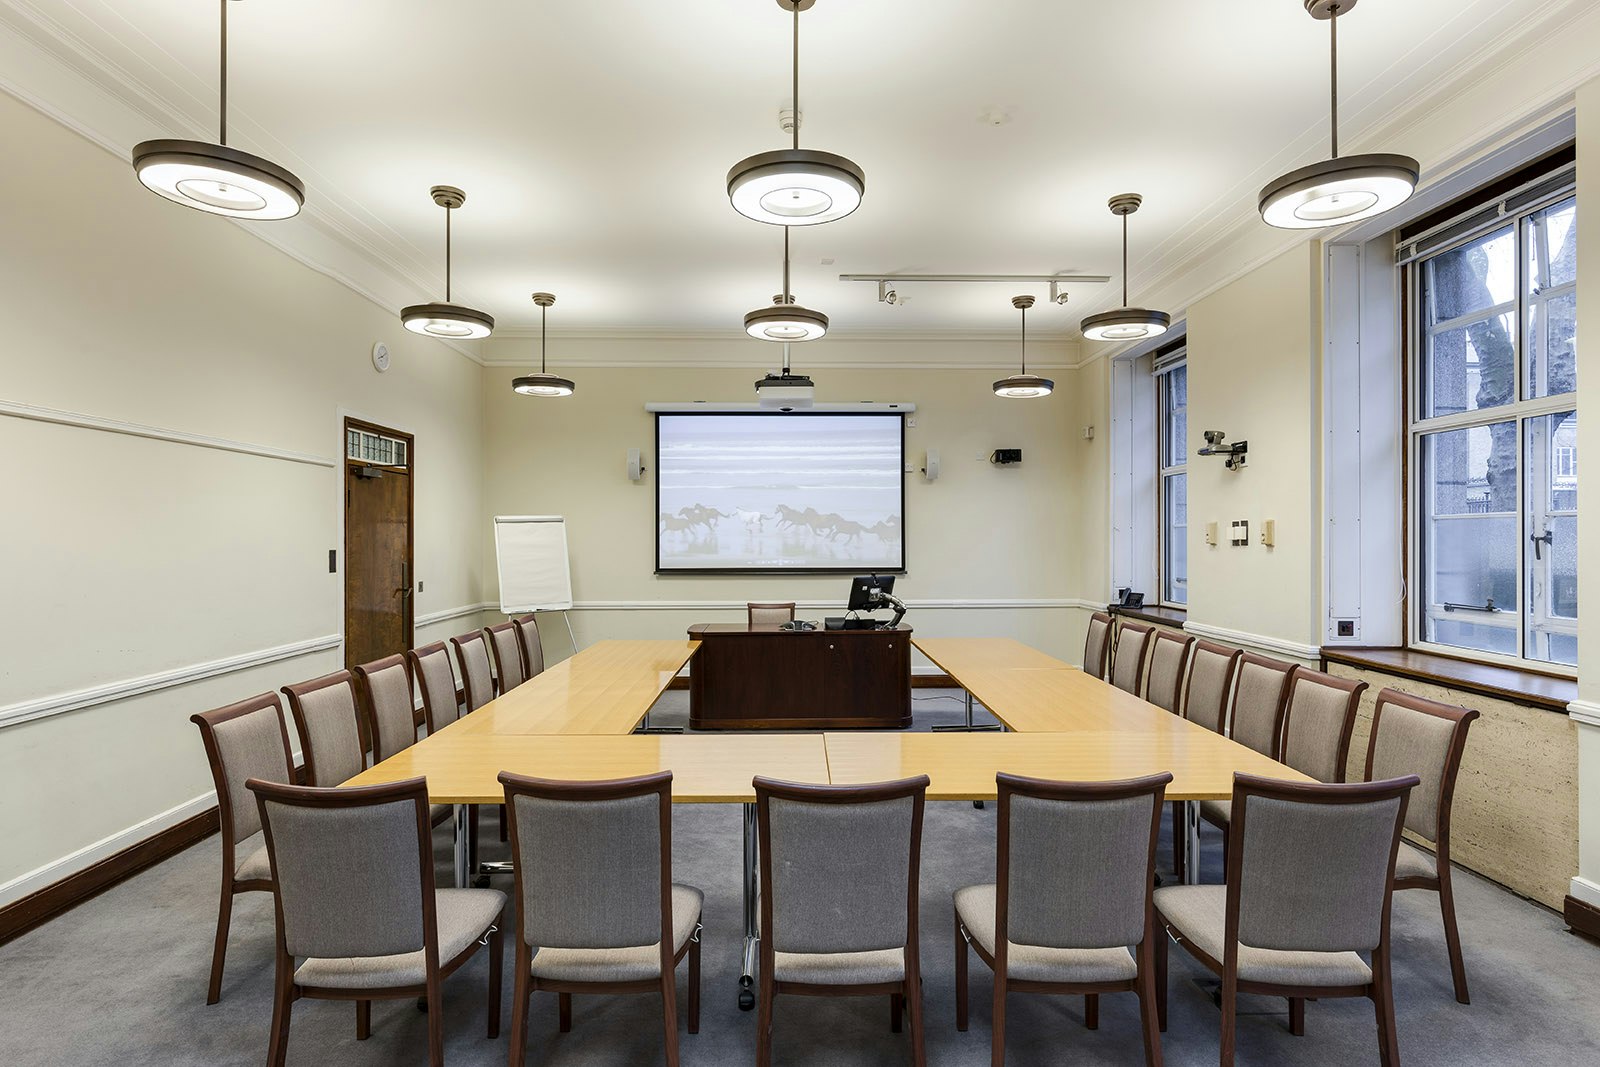 Business | Meeting Rooms - Breakout Spaces